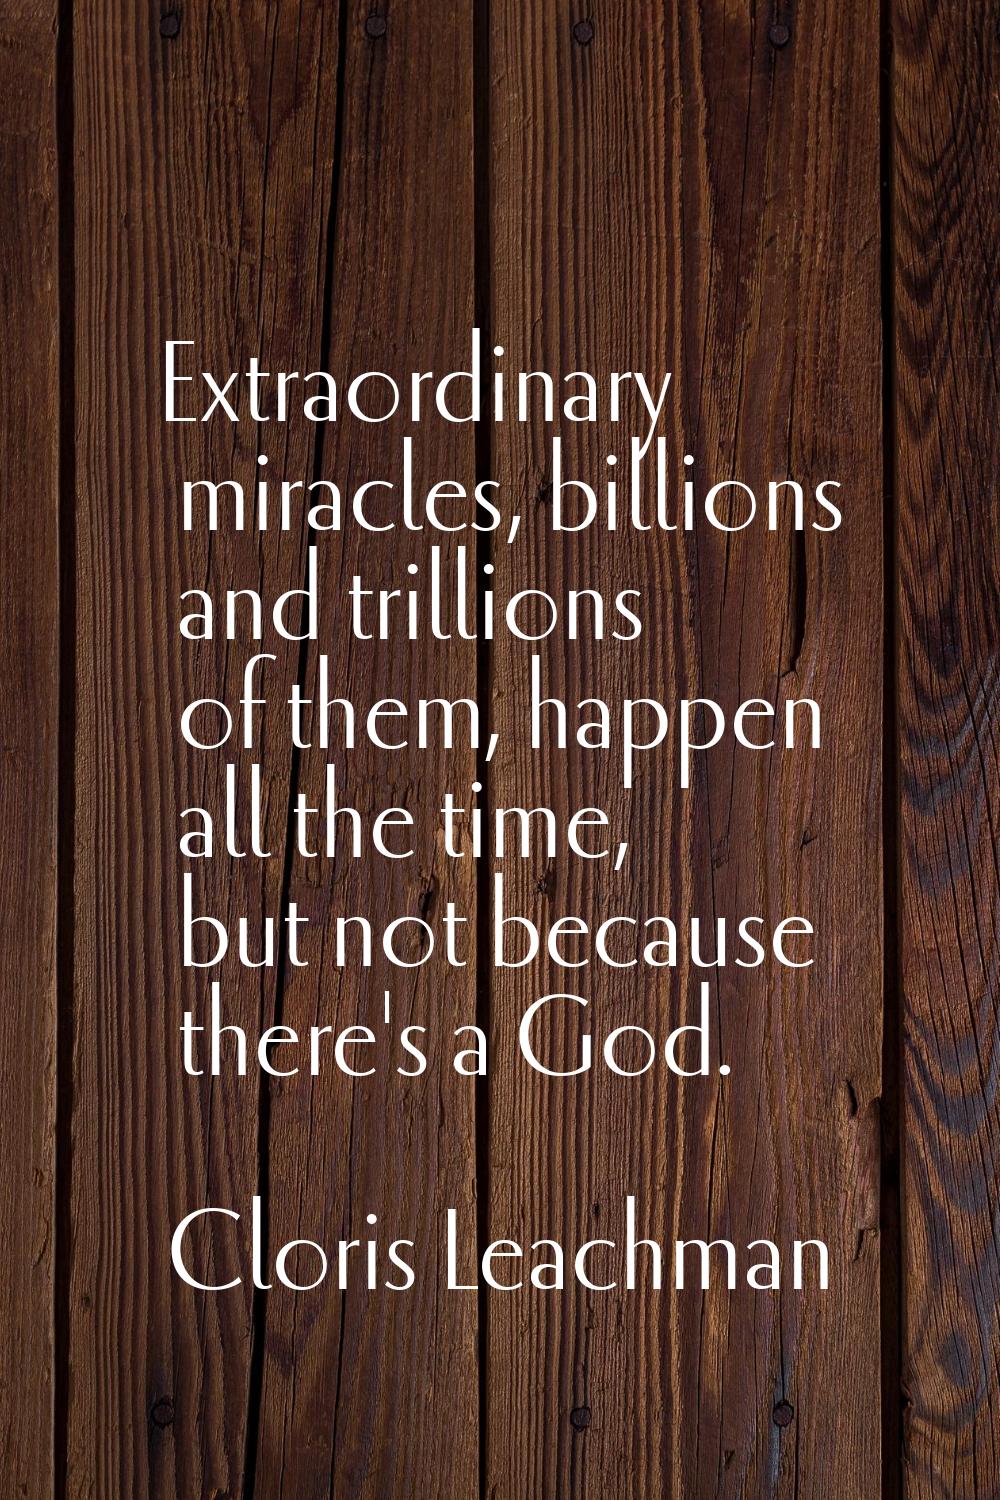 Extraordinary miracles, billions and trillions of them, happen all the time, but not because there'